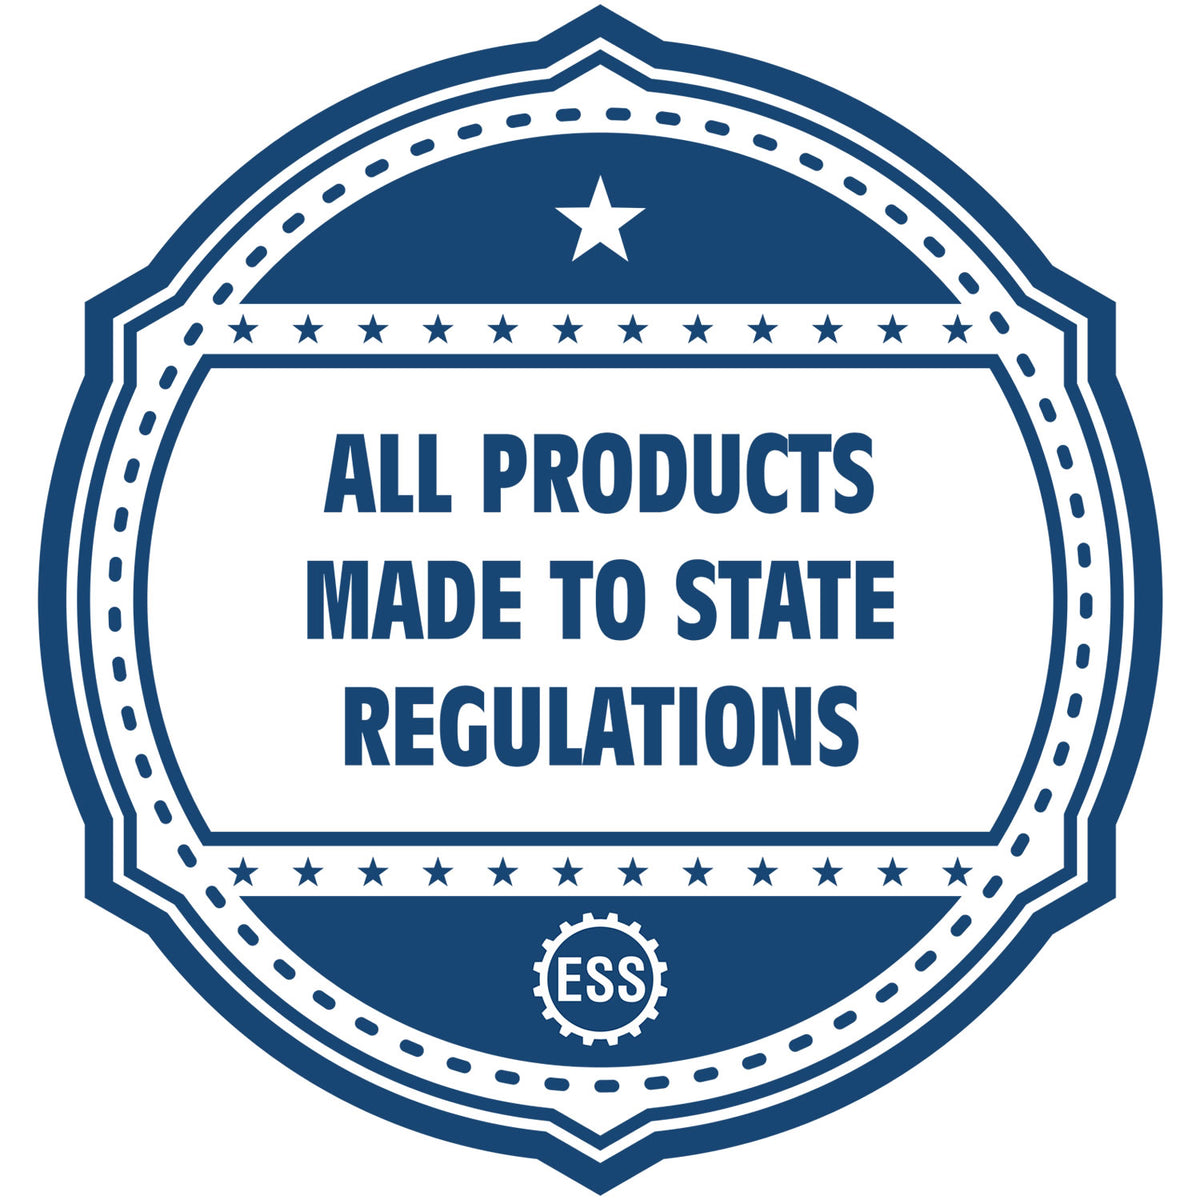 An icon or badge element for the Heavy-Duty Idaho Rectangular Notary Stamp showing that this product is made in compliance with state regulations.